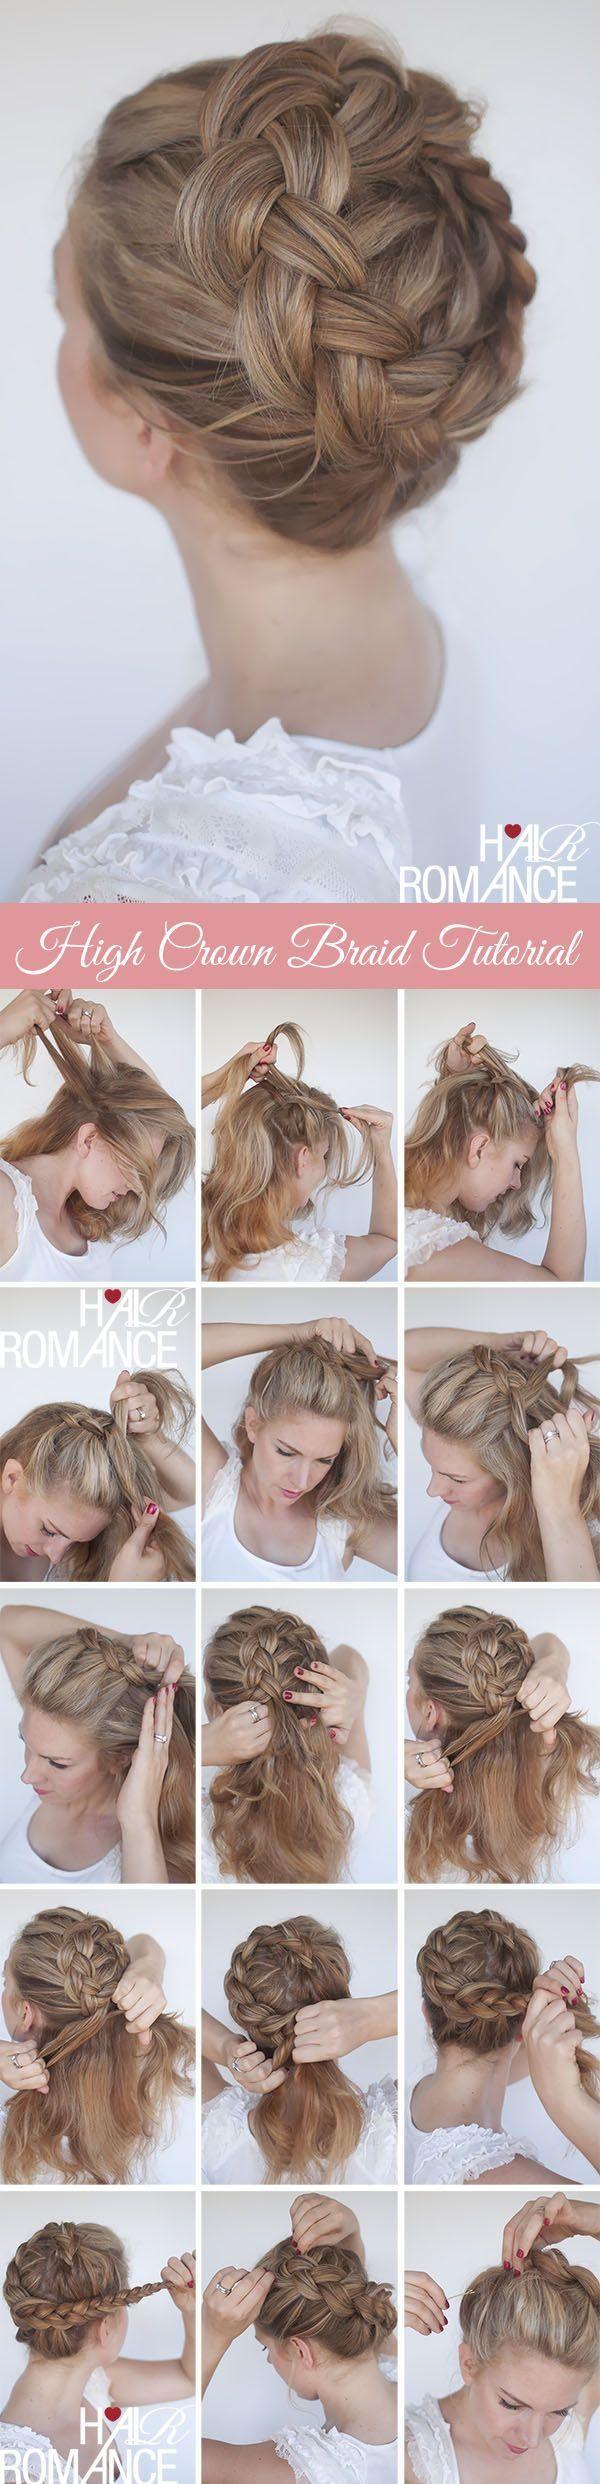 Wedding - 15 Braided Hairstyles That Will Look Amazing With Your Prom Dress